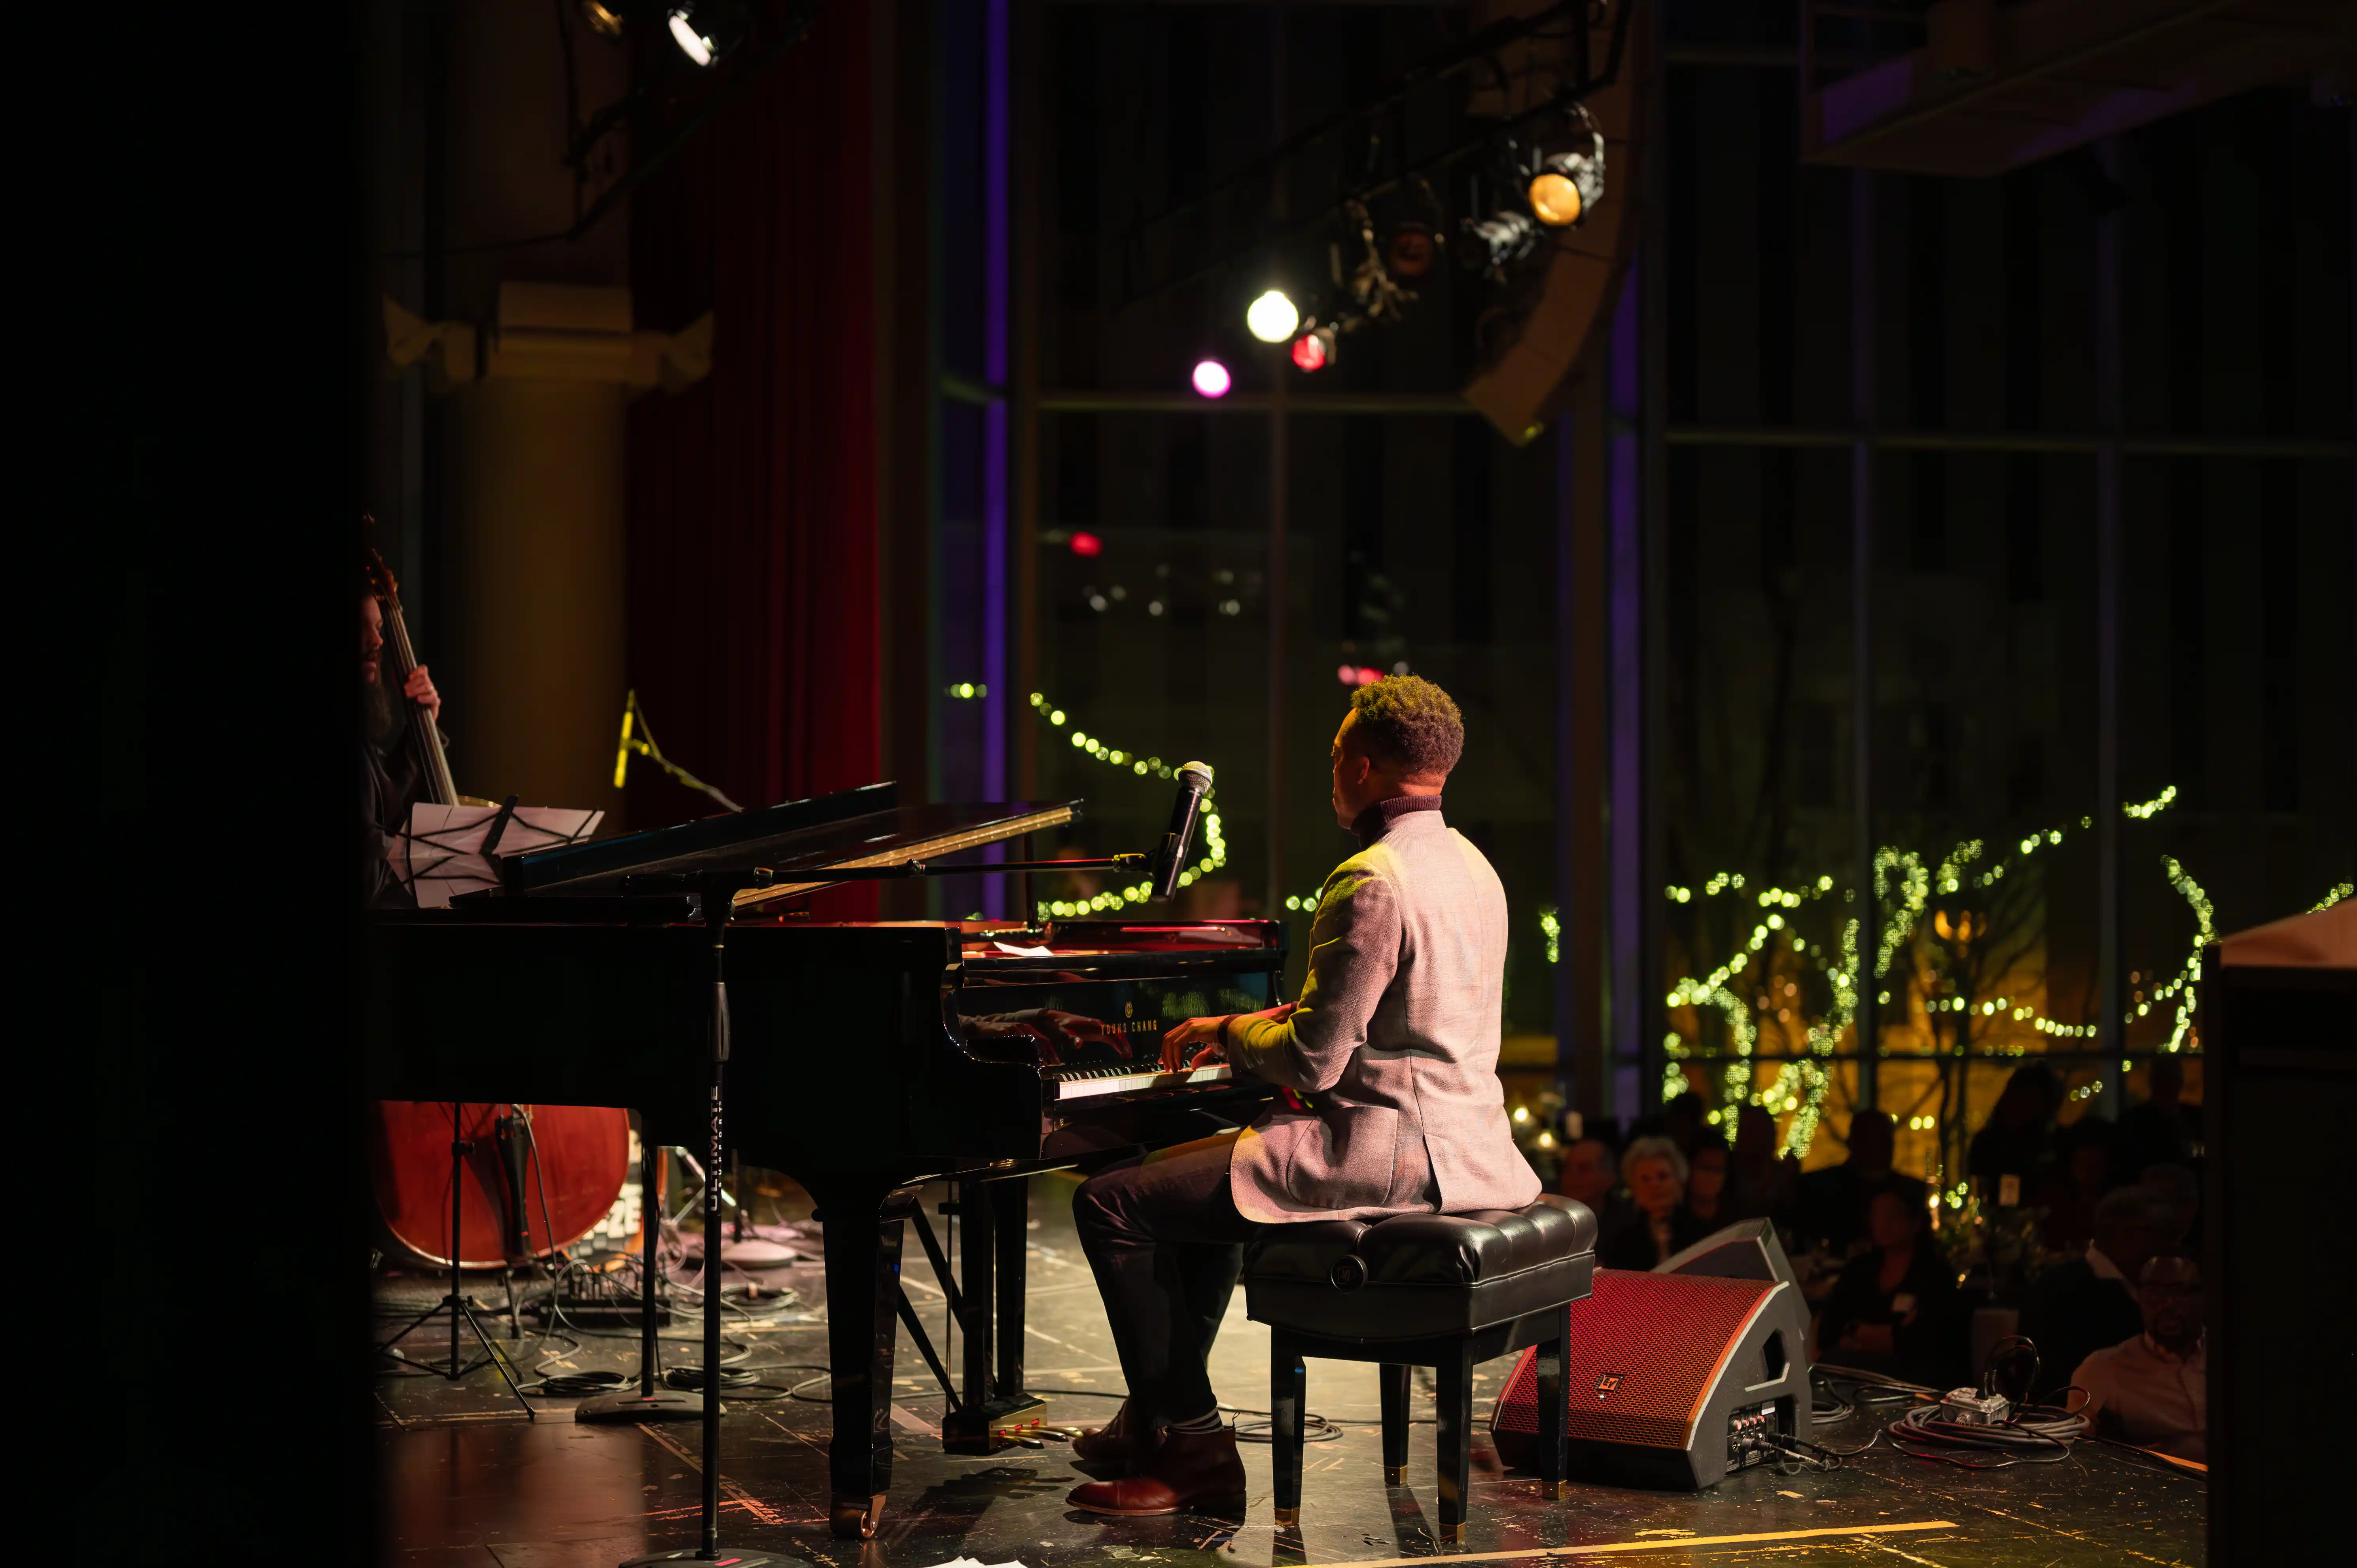 Pianist performing on stage in a dimly lit venue with a grand piano and decorative lights in the background.